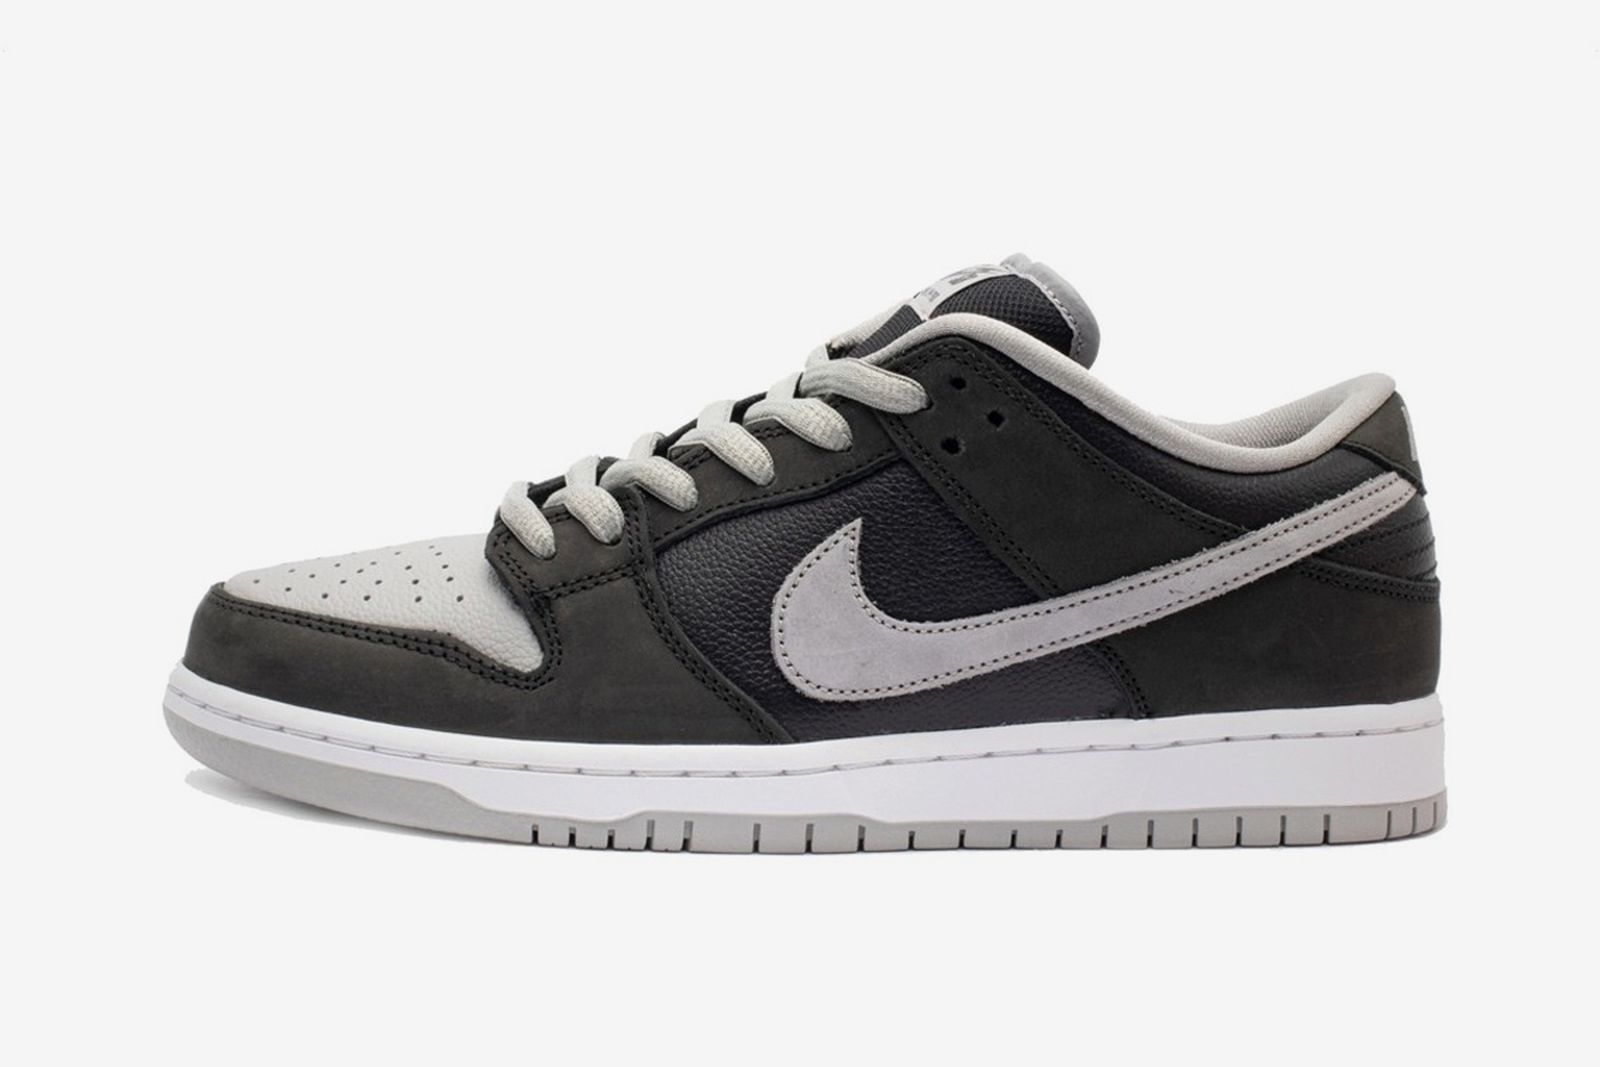 Nike SB Dunk Low “Shadow”: Official Images & Rumored Release Info